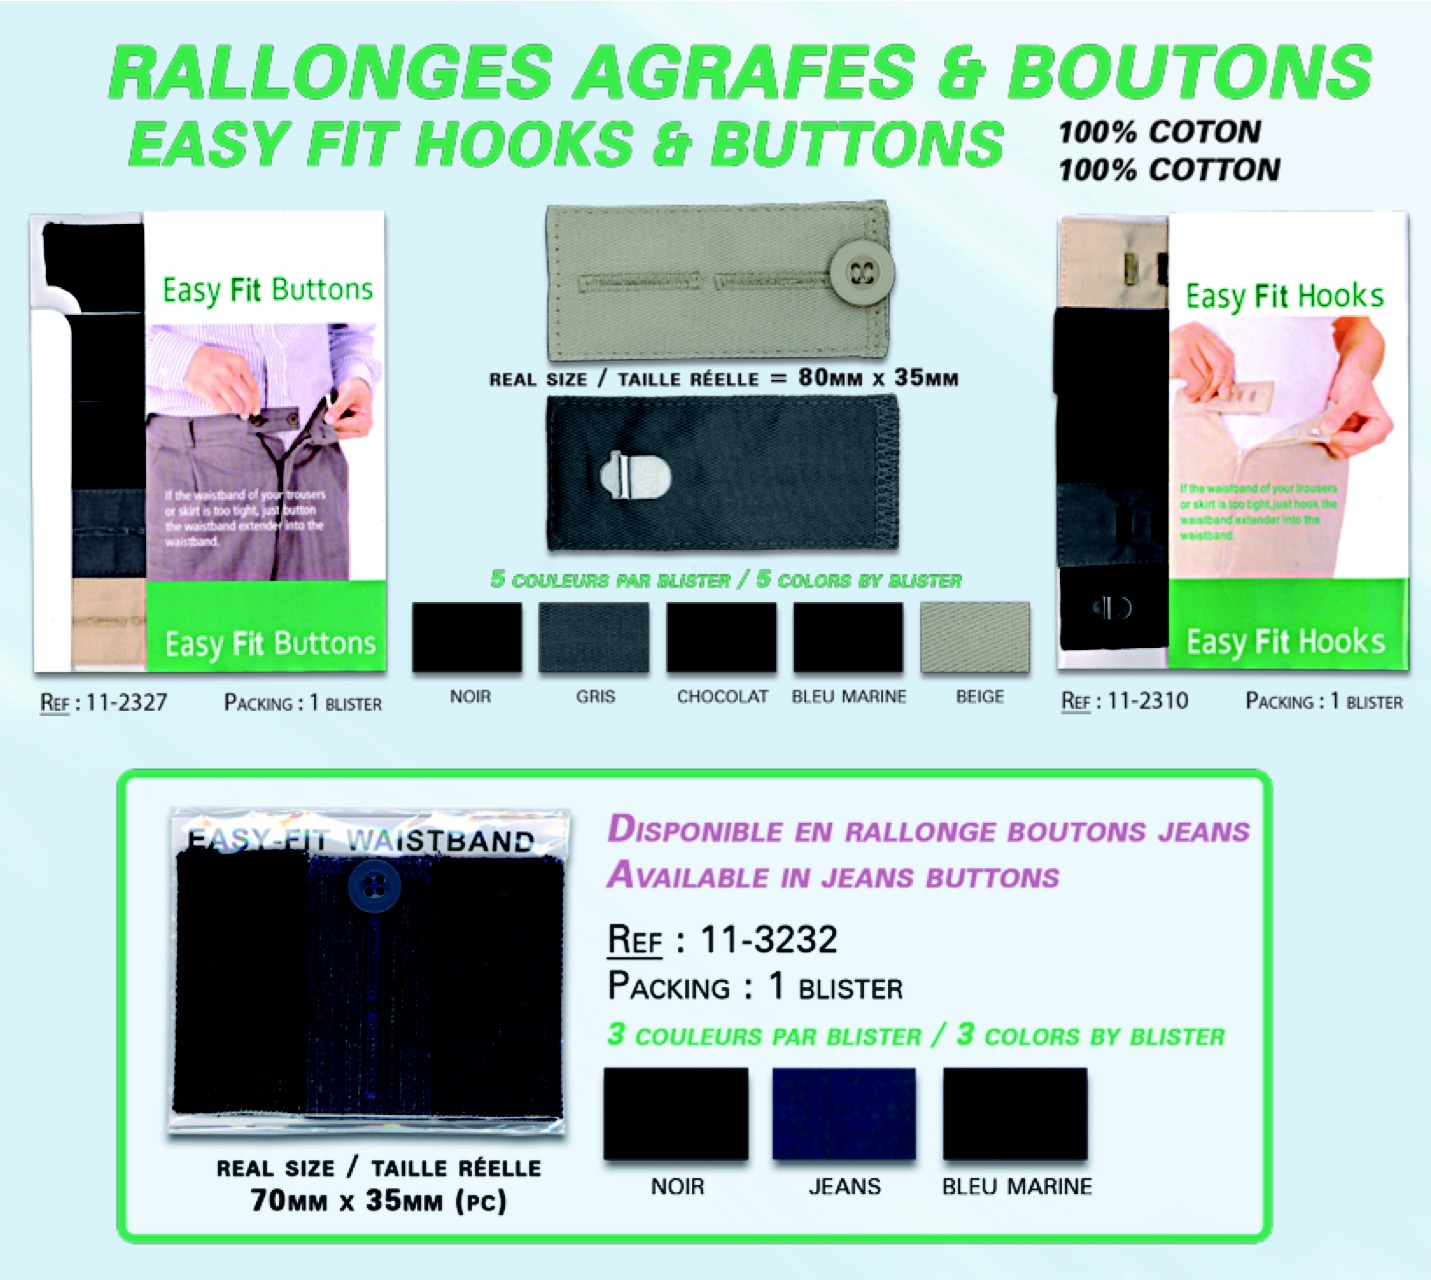 rallonges agrafe *et* boutons